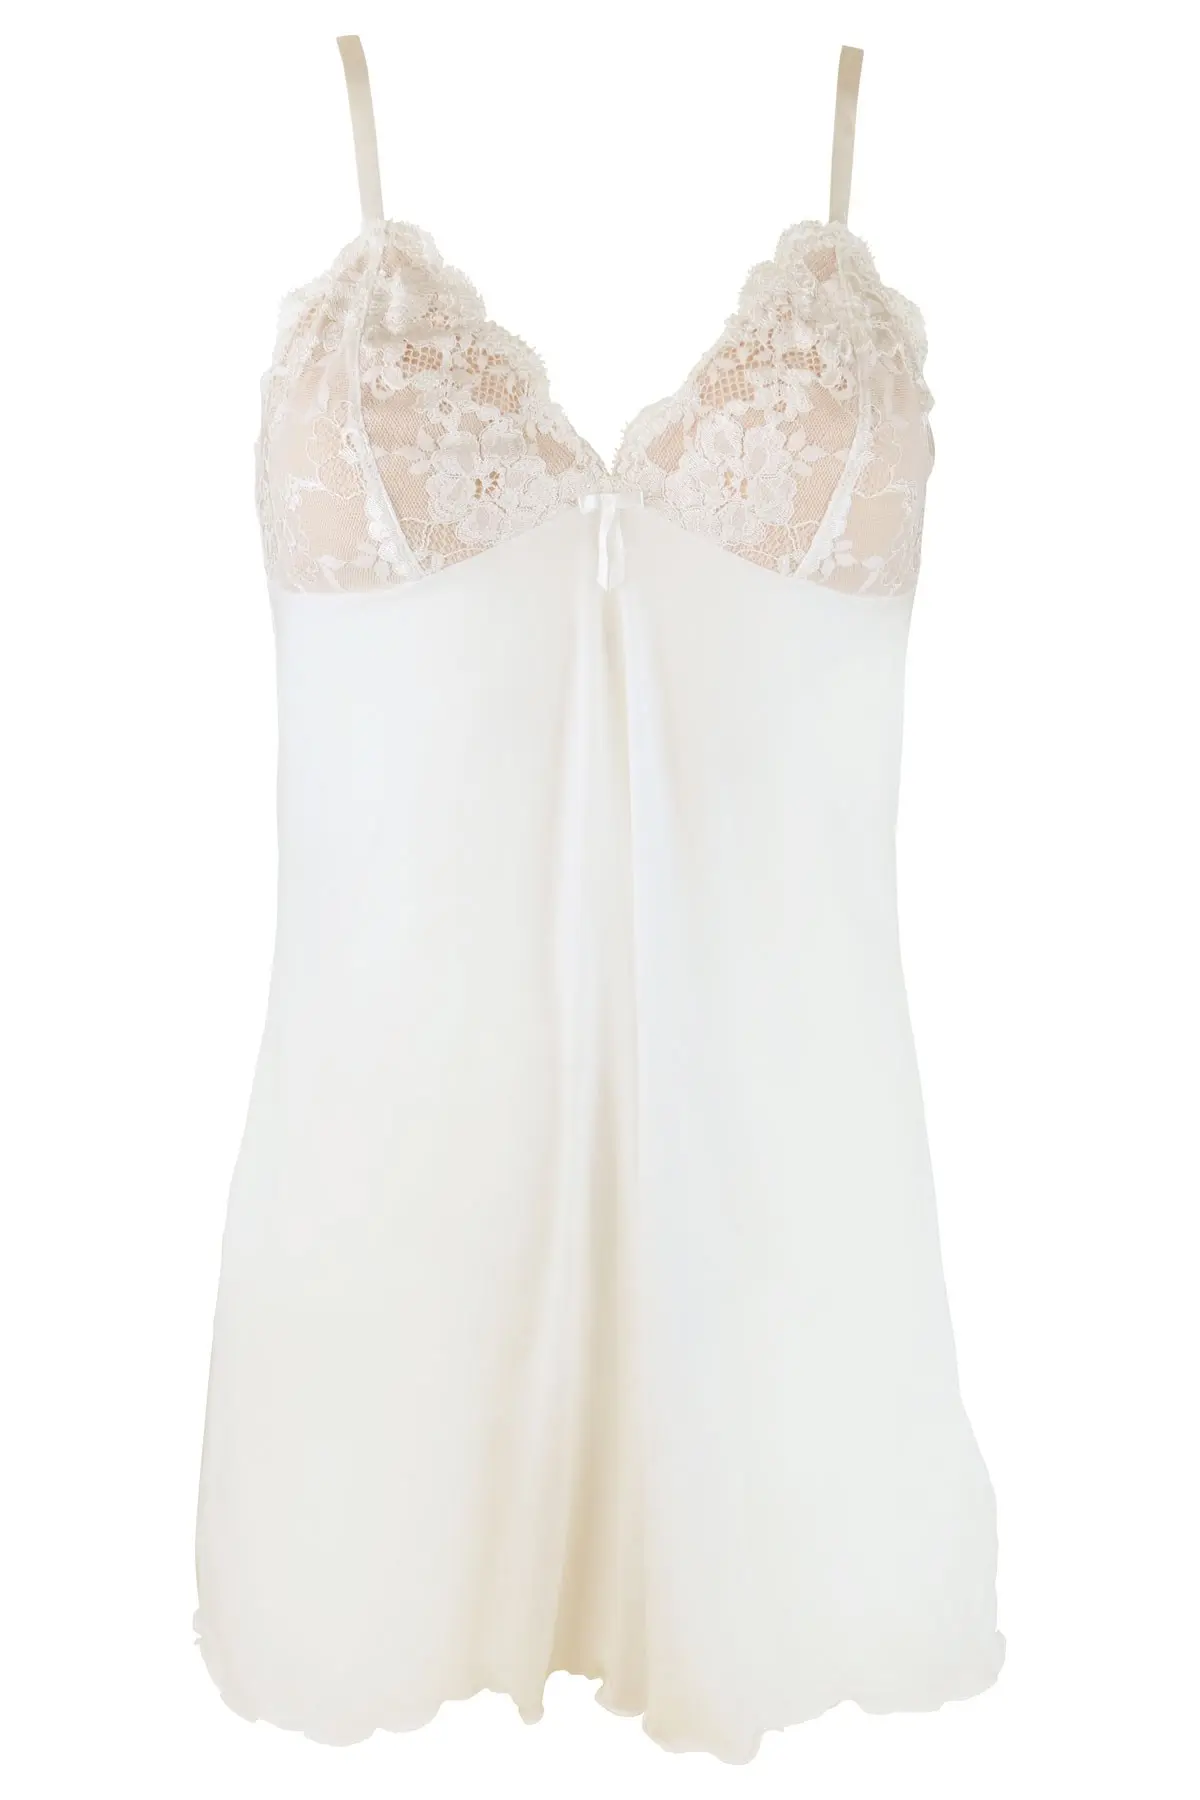 Amour Luxe Chemise | Pour Moi | Amour Luxe Chemise | Ivory/Champagne ...